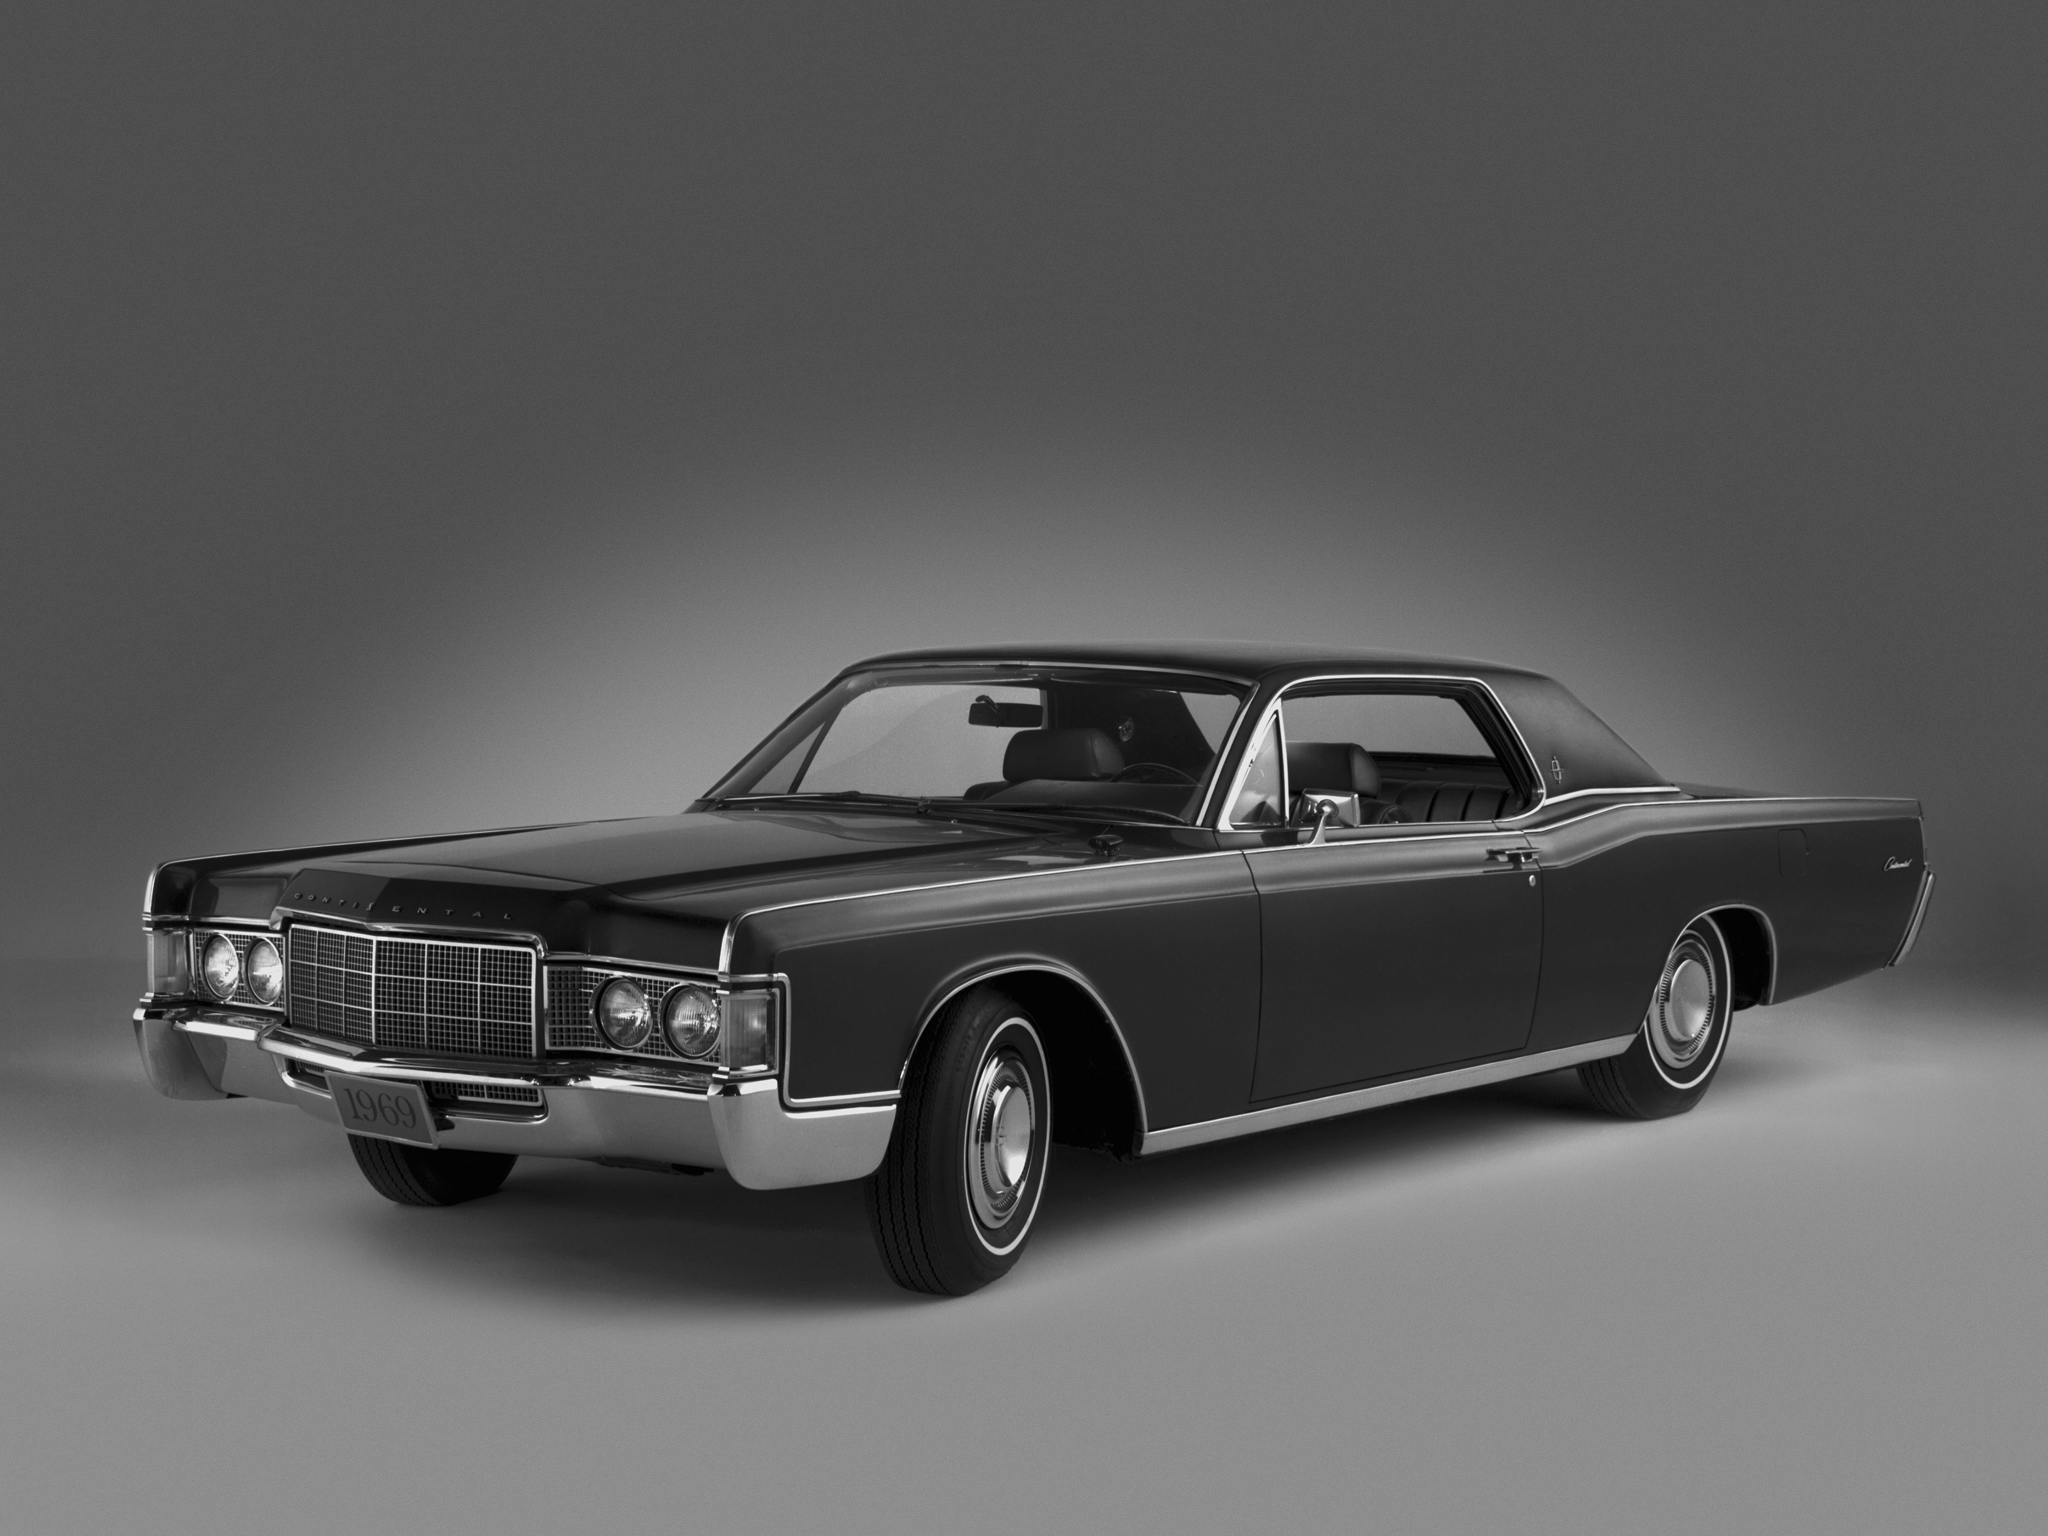 1969, Lincoln, Continental, Hardtop, Coupe, 65a, Classic, Luxury Wallpaper